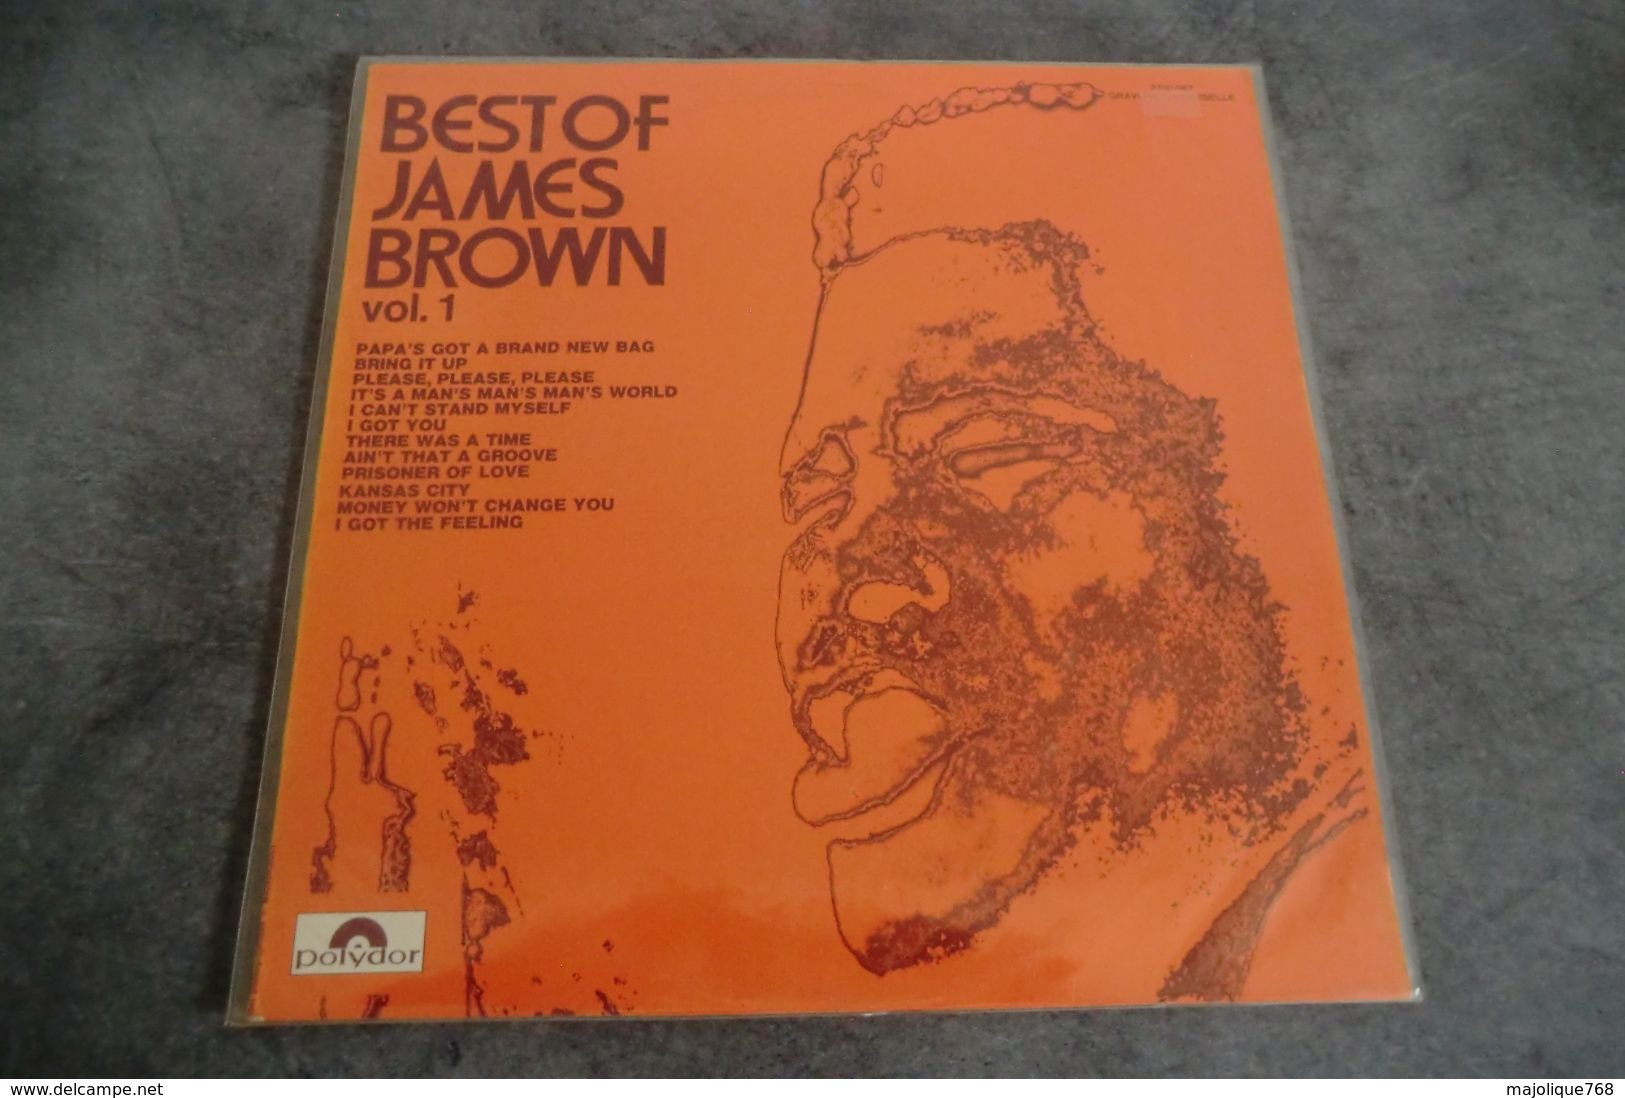 Disque - James Brown - Best Of James Brown Vol 1 - Polydor 2310087 - France - - Soul - R&B